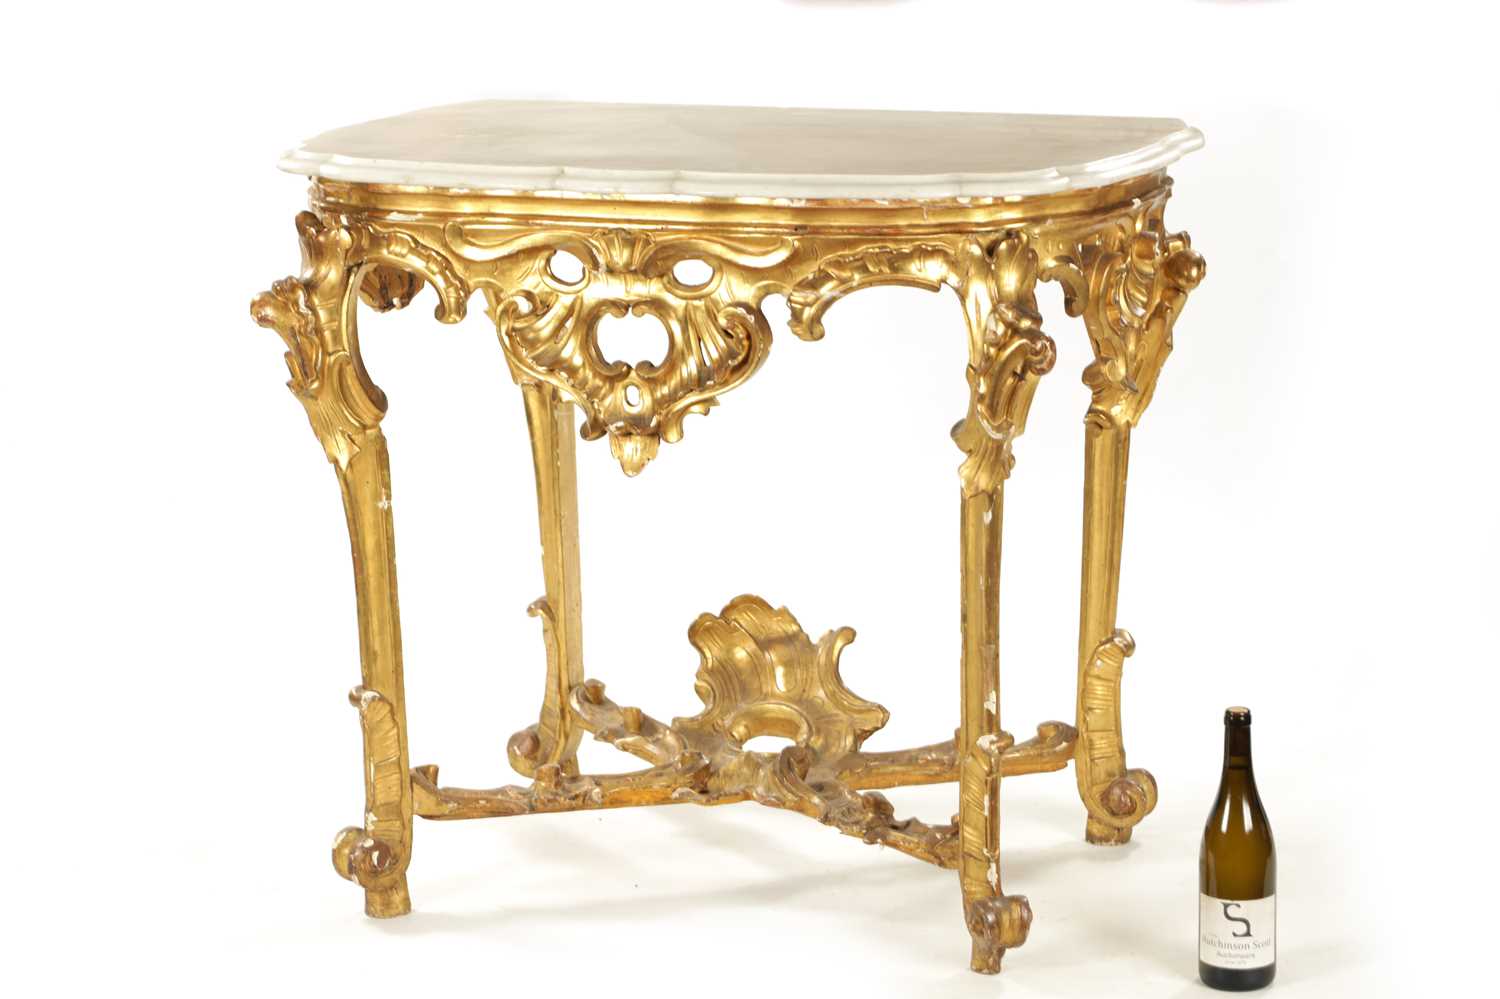 AN 18TH CENTURY CARVED GILTWOOD CONSOLE TABLE - Image 4 of 7